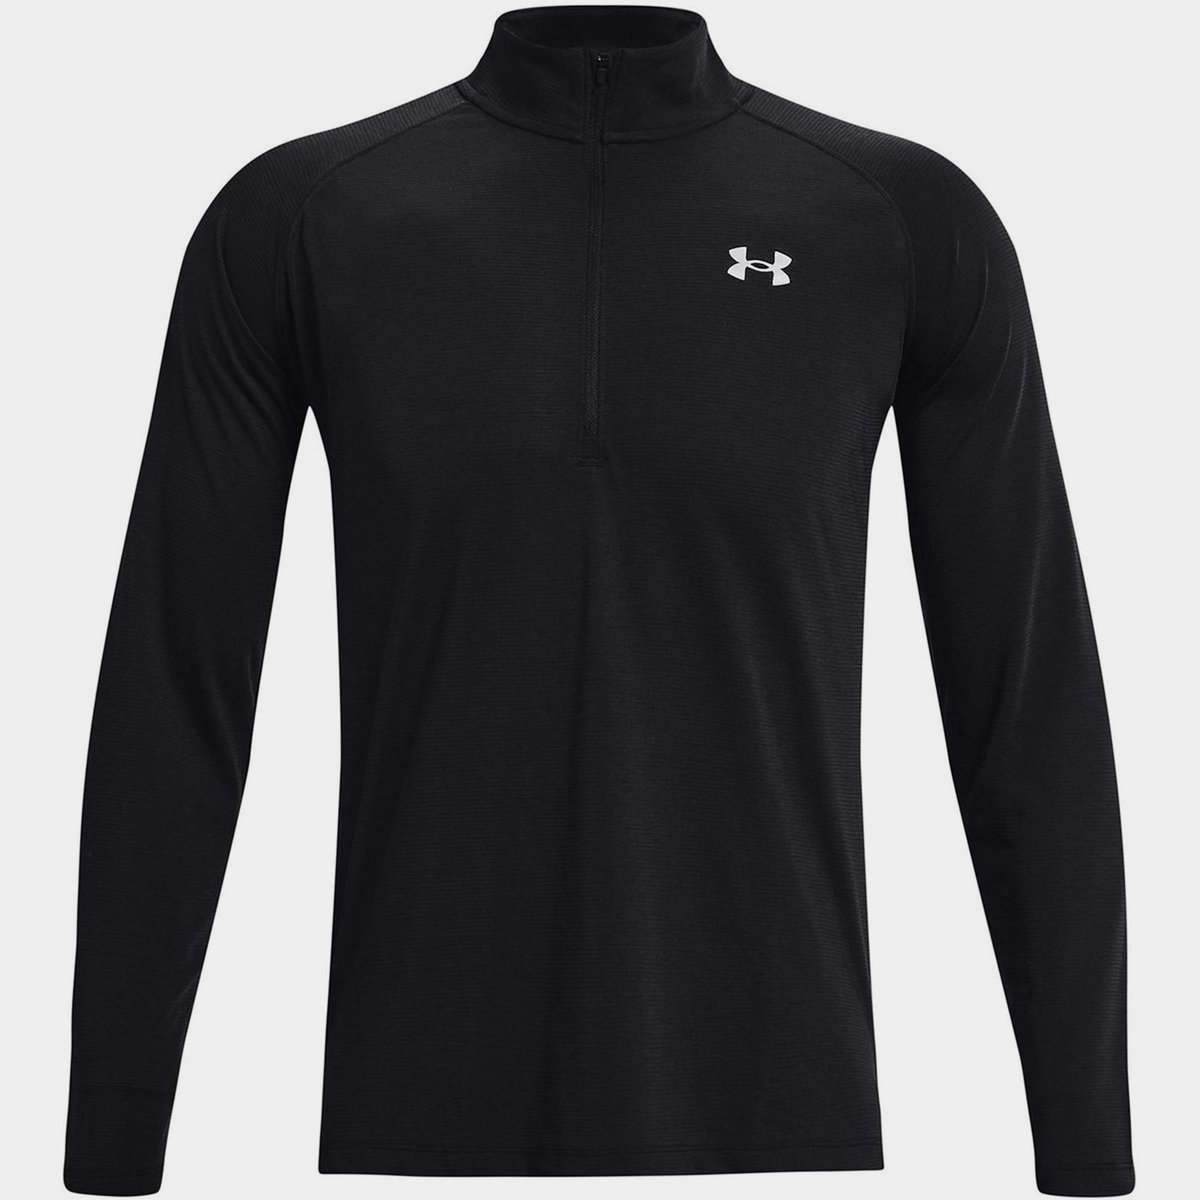 Under Armour OutRun The Cold Long Sleeve Men's Running Top - Capri/Petrol  Blue